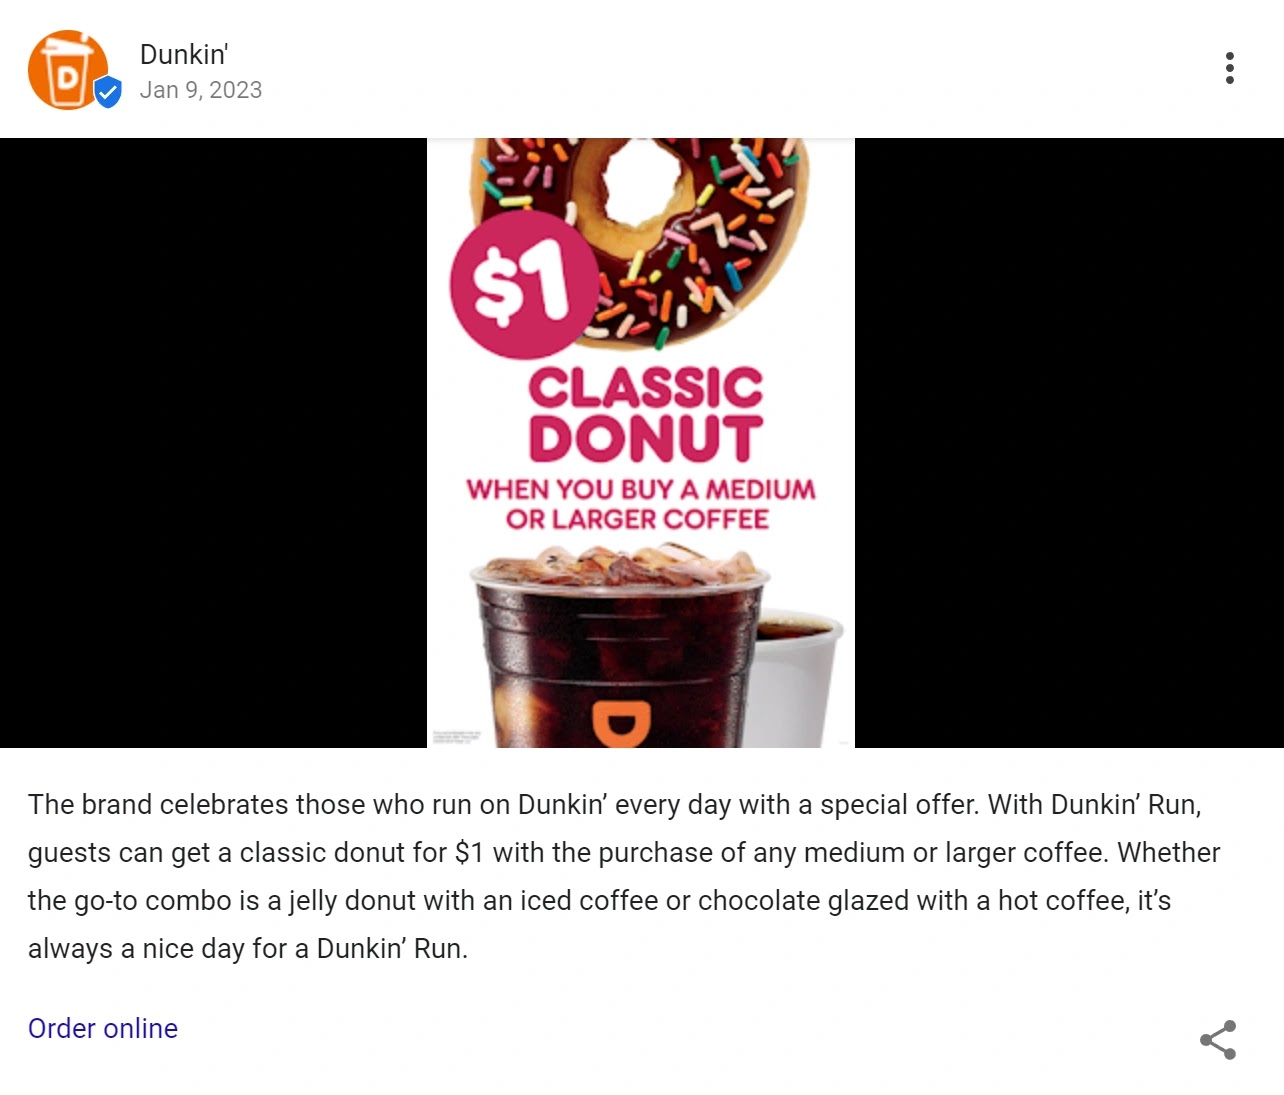 Dunkin' Donuts' Google Business Profile post announcing a special $1 donut offer